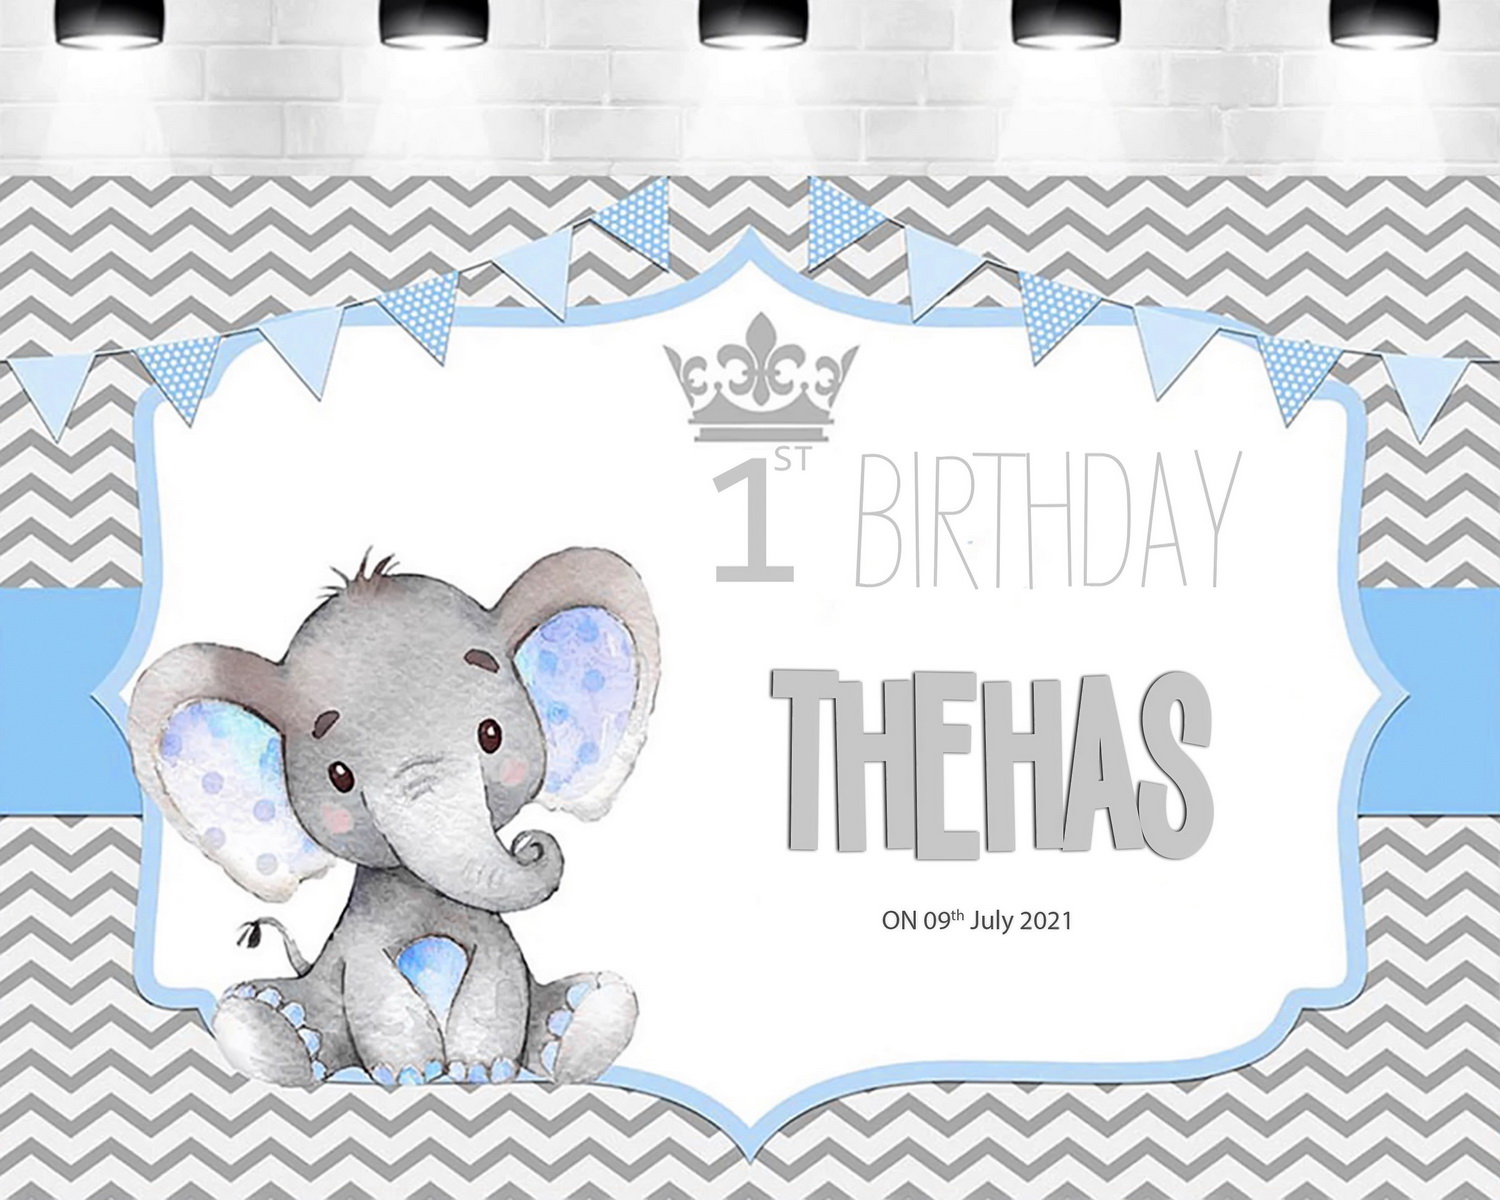 Thehas Turns One